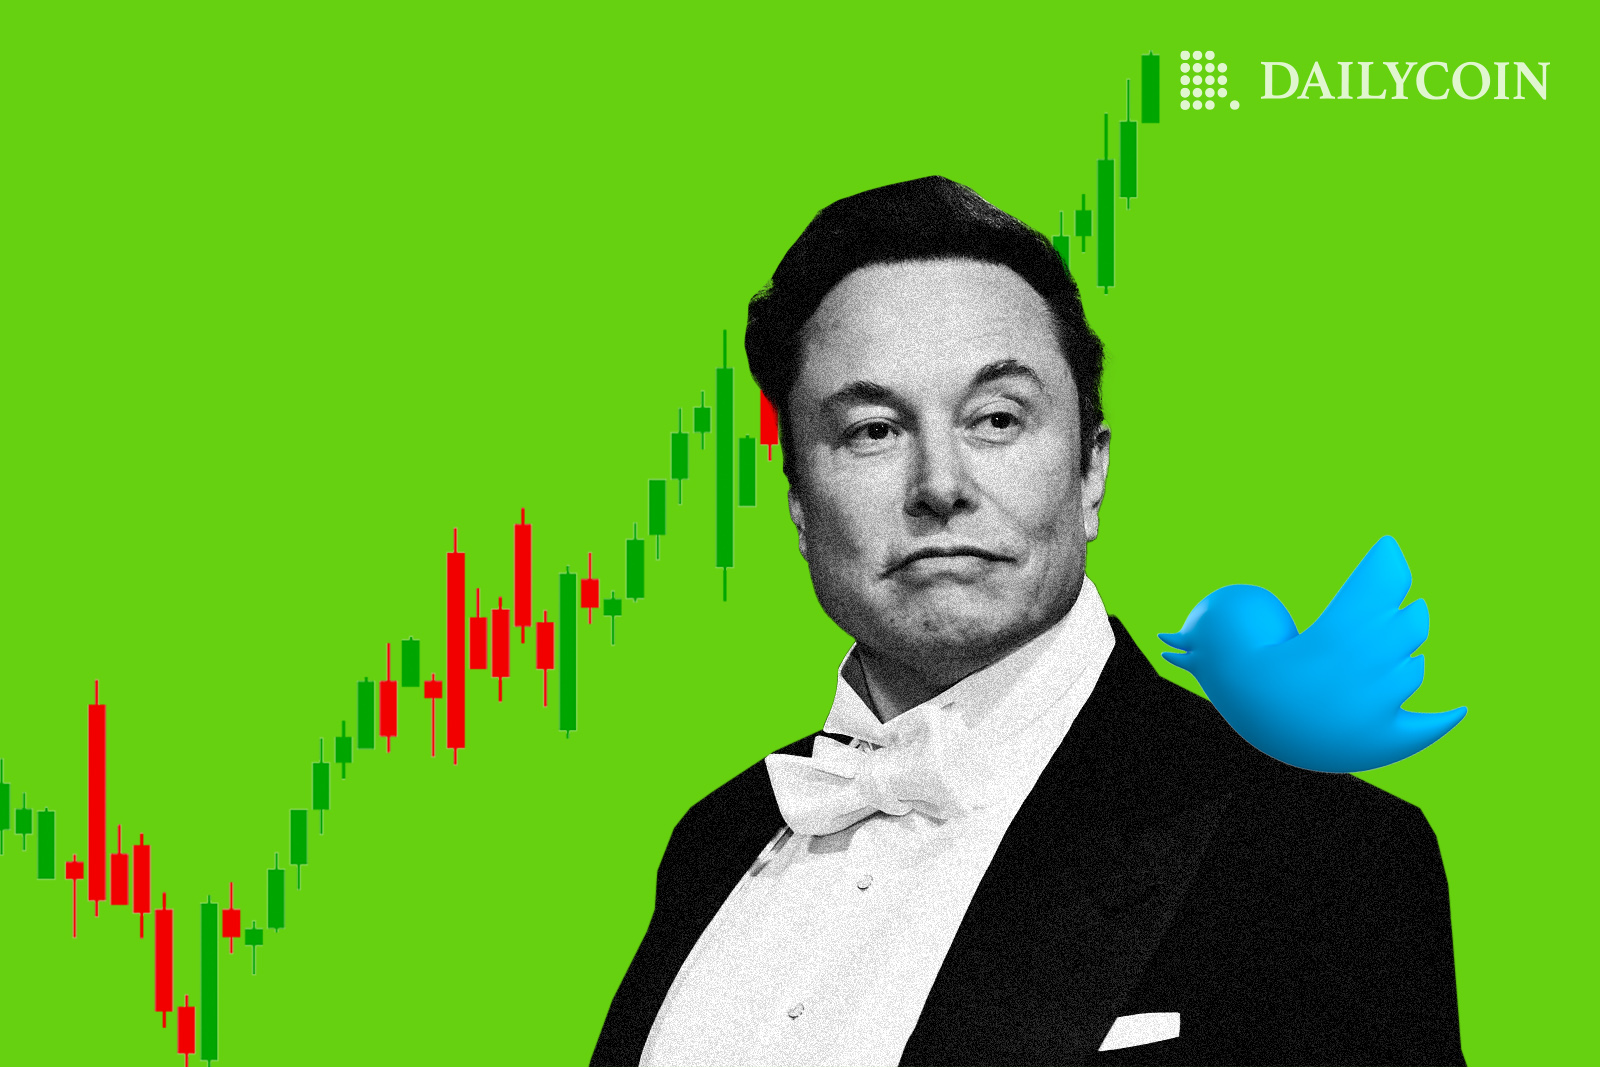 Elon Musk wearing a tuxedo with a blue Twitter logo bird on shoulder in front of a crypto chart